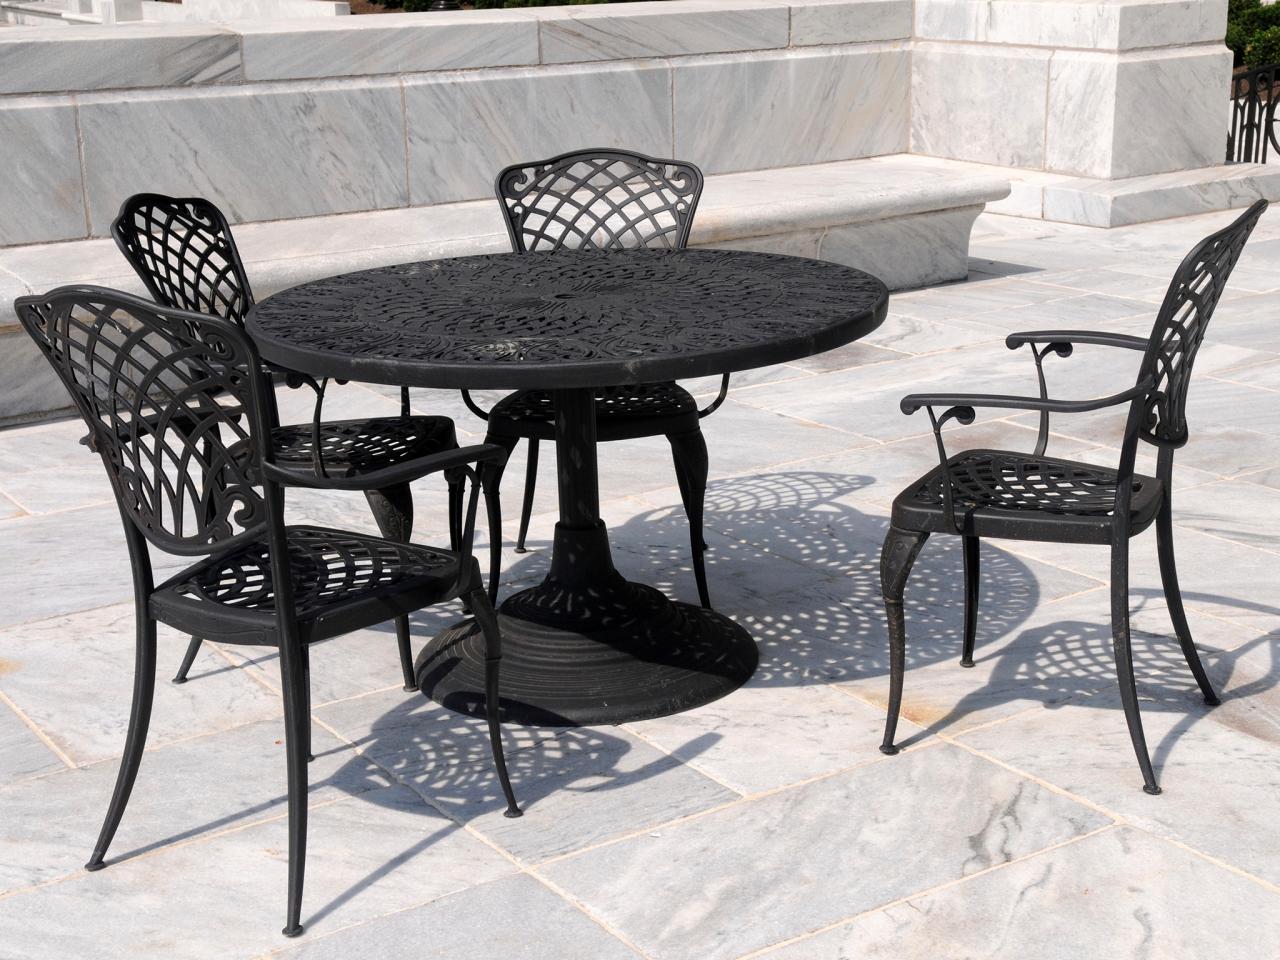 How To Clean Iron Patio Furniture